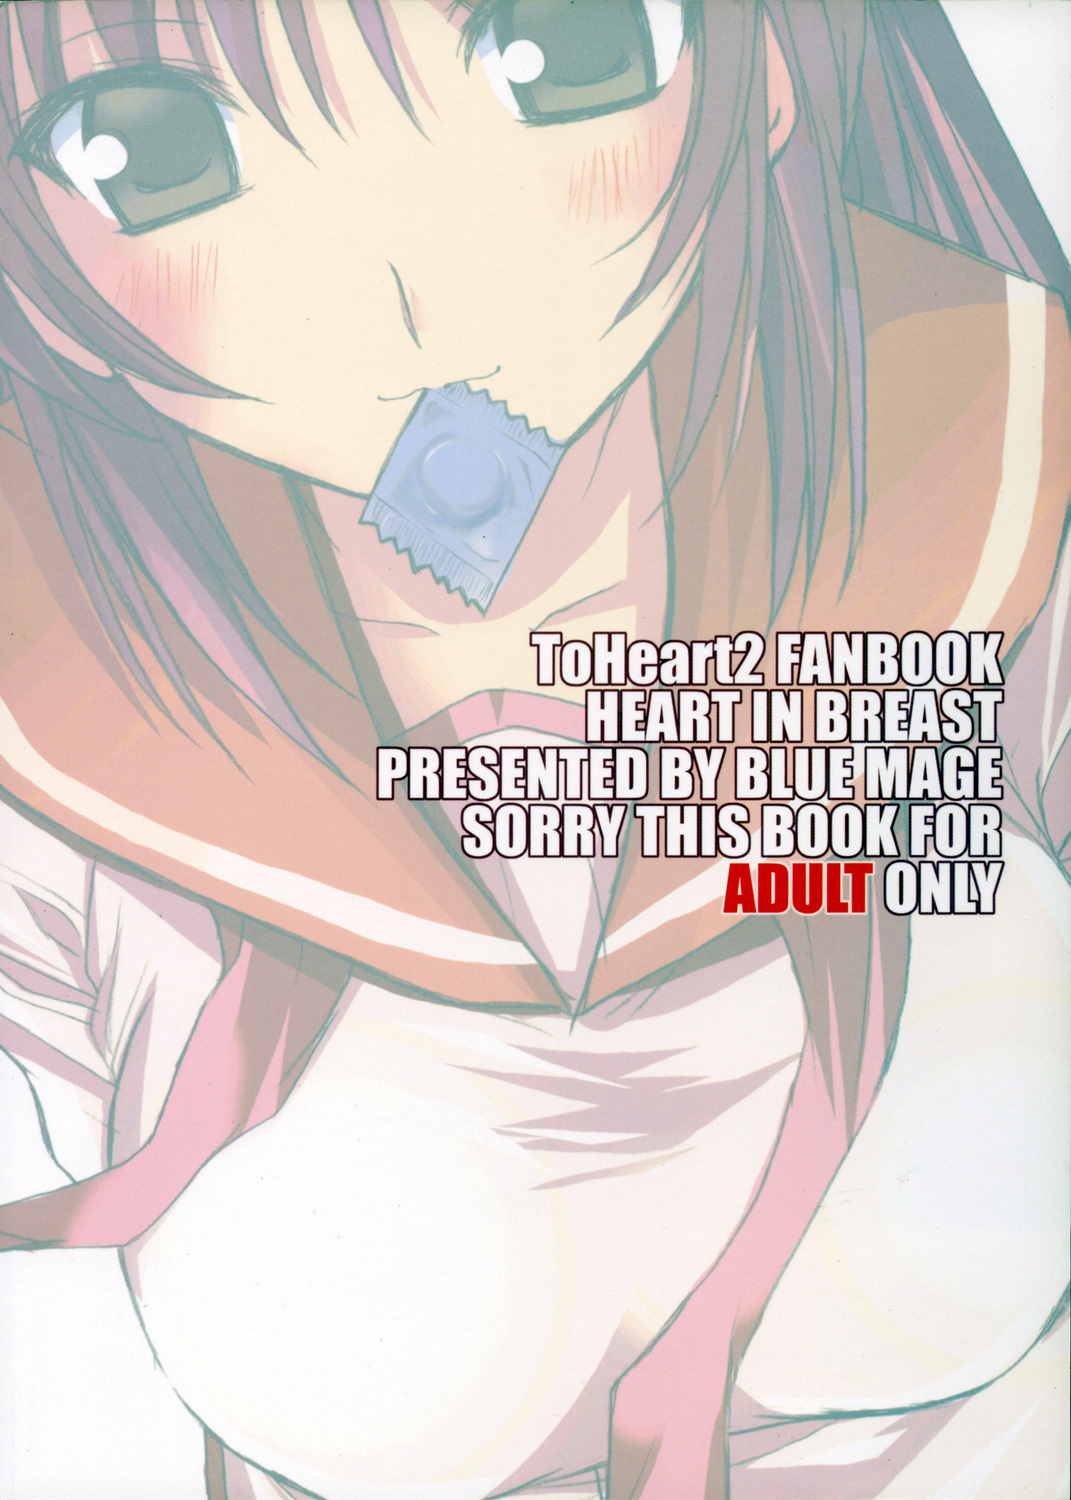 (CR37) [BlueMage (Aoi Manabu)] HEART IN BREAST (ToHeart2) page 22 full